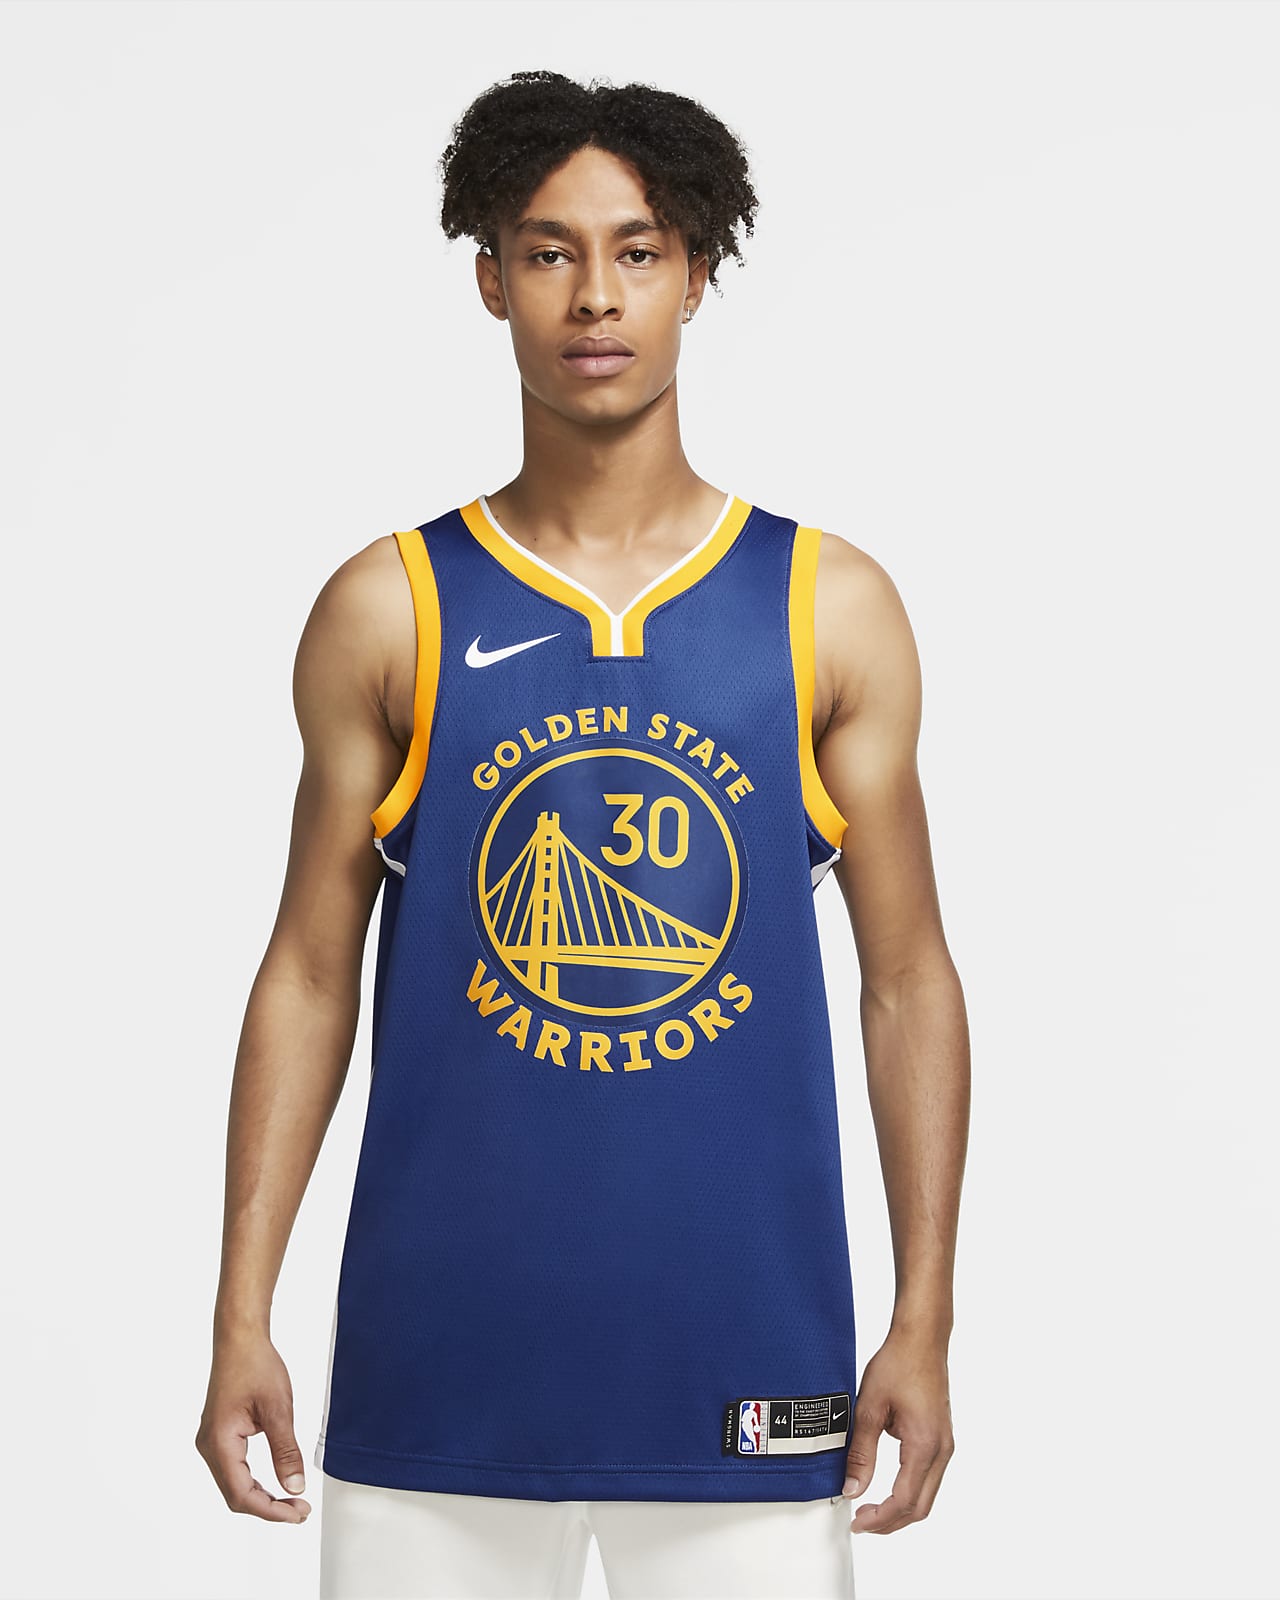 stephen curry jersey price philippines